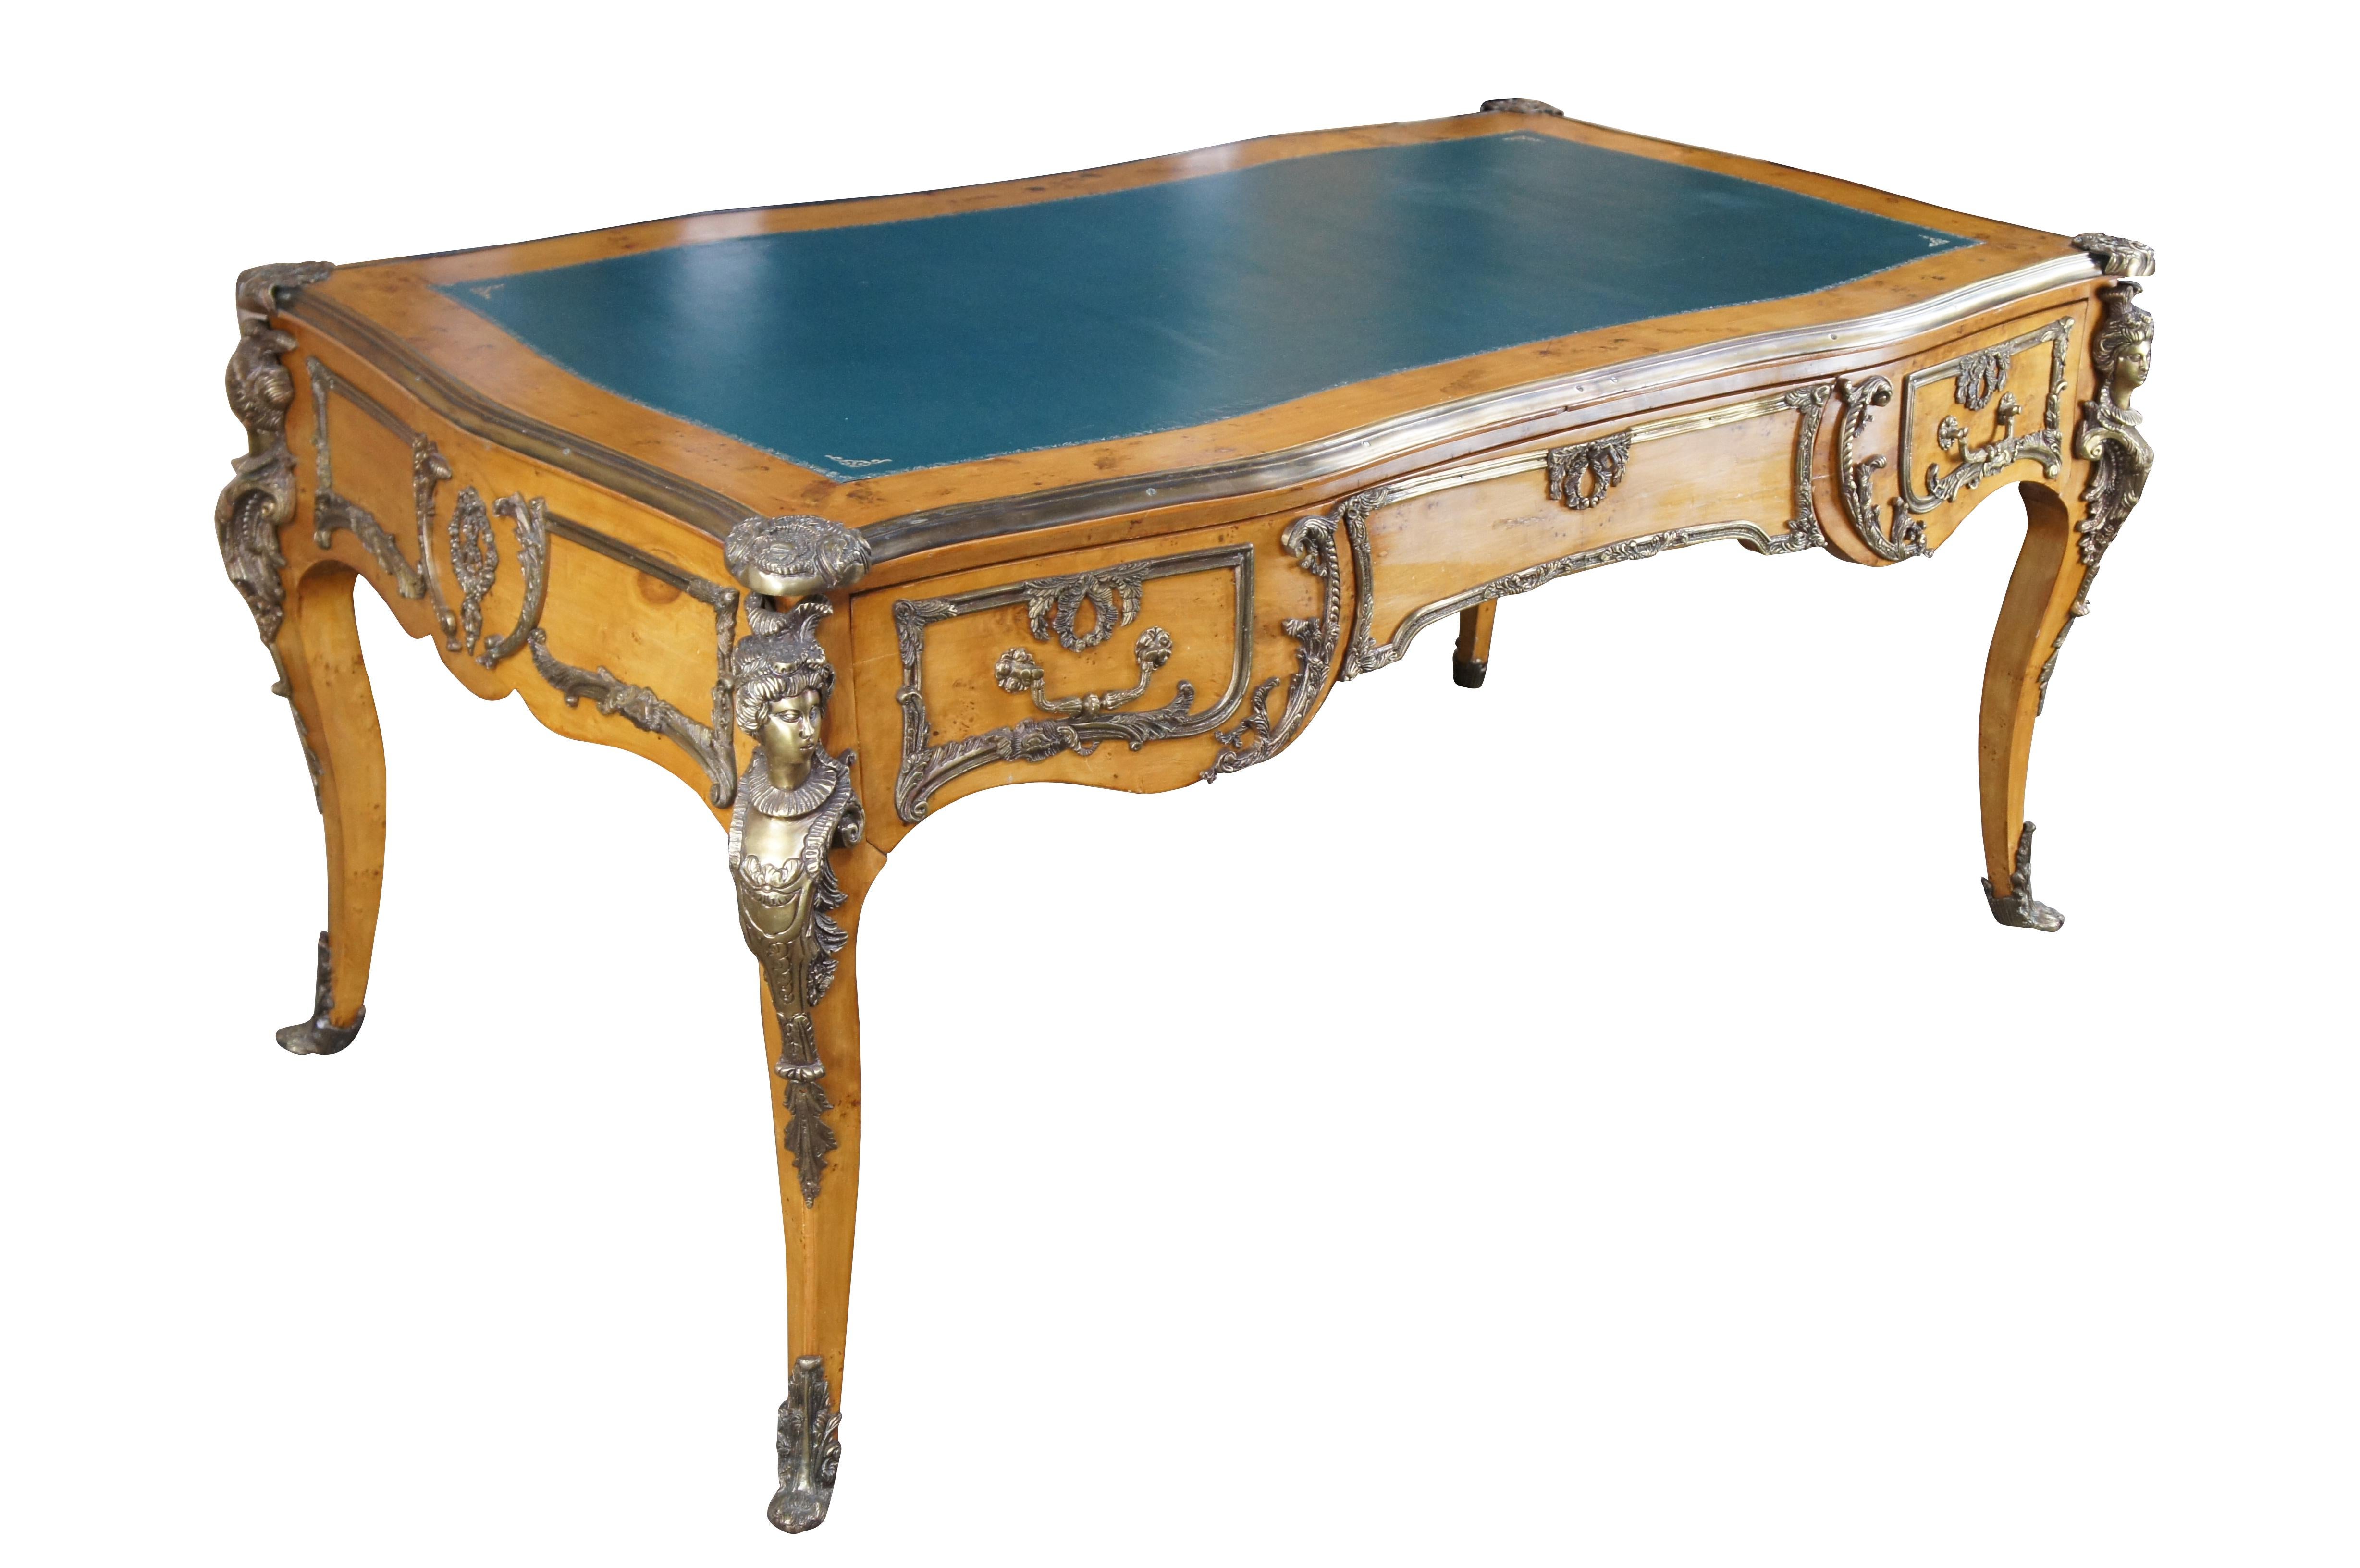 Monumental Louis XV / Napoleon III style office desk. A serpentine form made from birdseye maple with three large dovetailed drawers in the frieze and long tapered cabriole legs. Features an inset tooled green leather top and ornate neoclassical